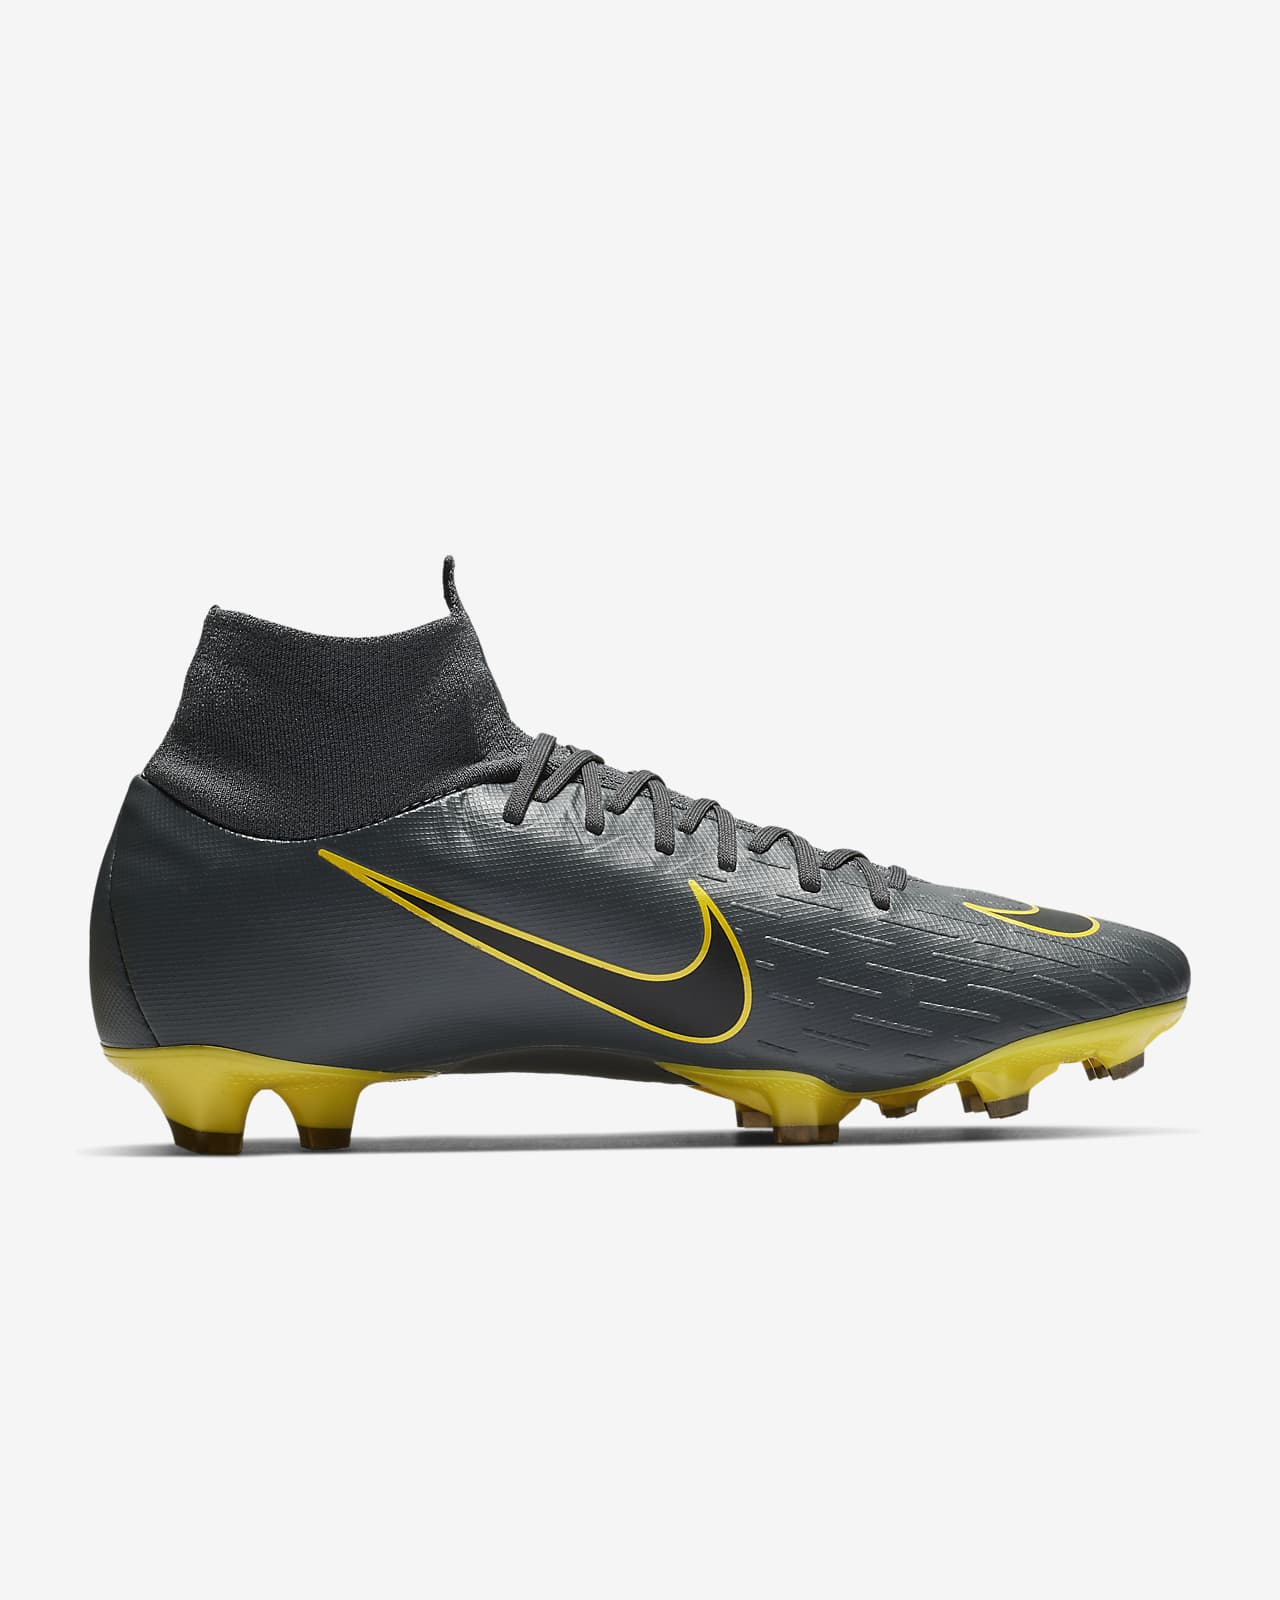 Nike Superfly 6 Pro FG Firm-Ground 